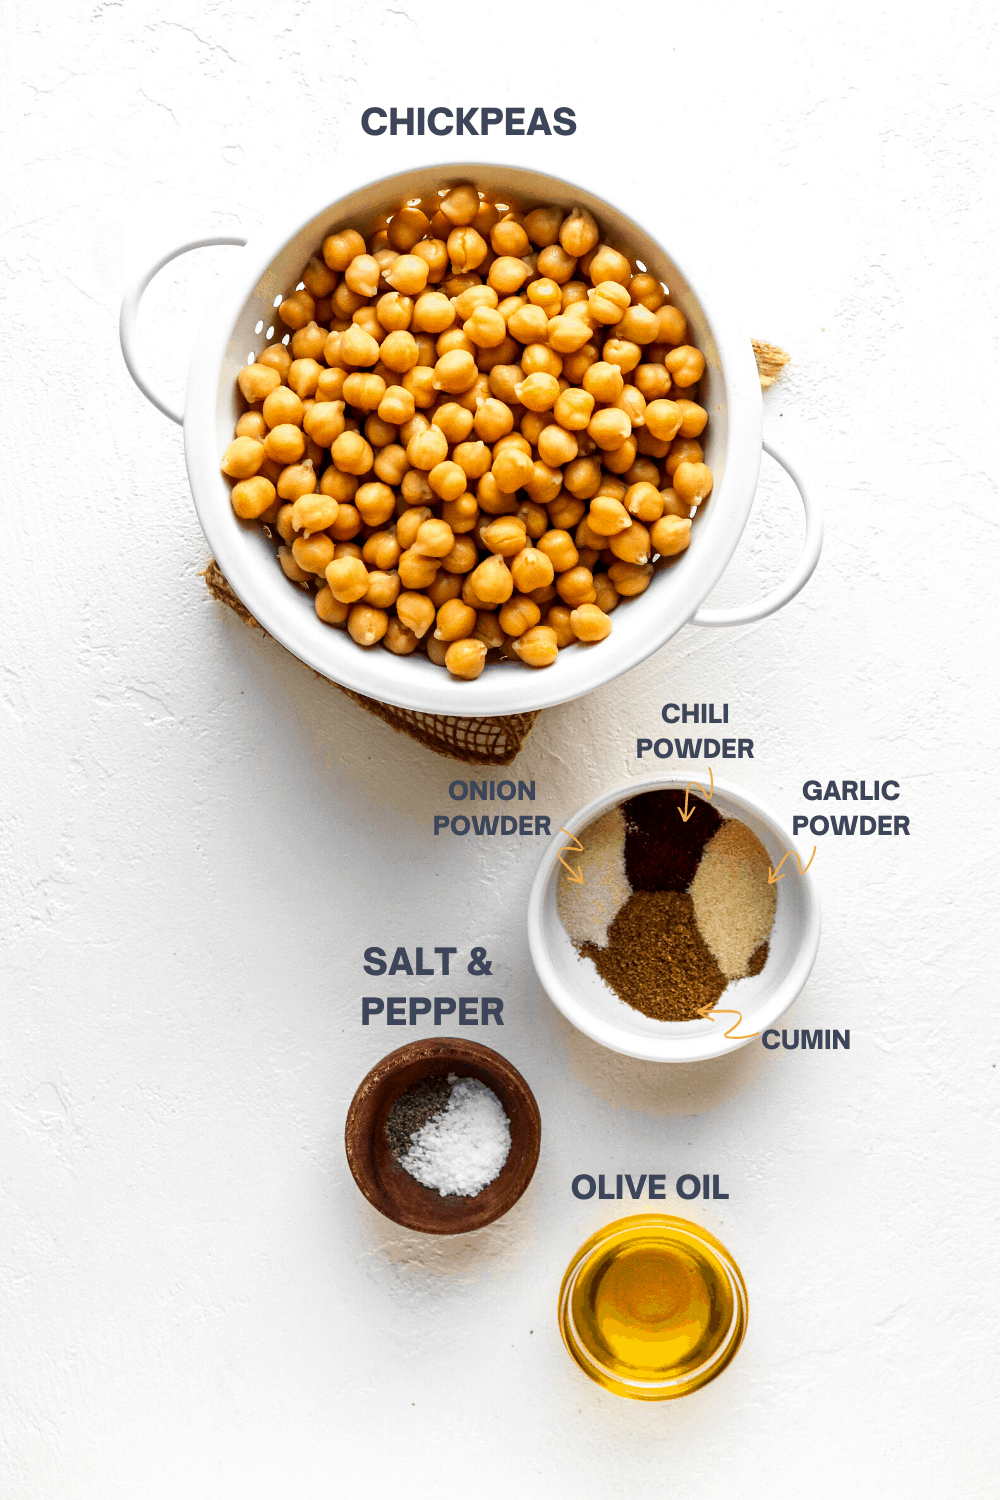 Beans in a white strainer with a bowl of spices, olives oil and salt and pepper on a white surface.